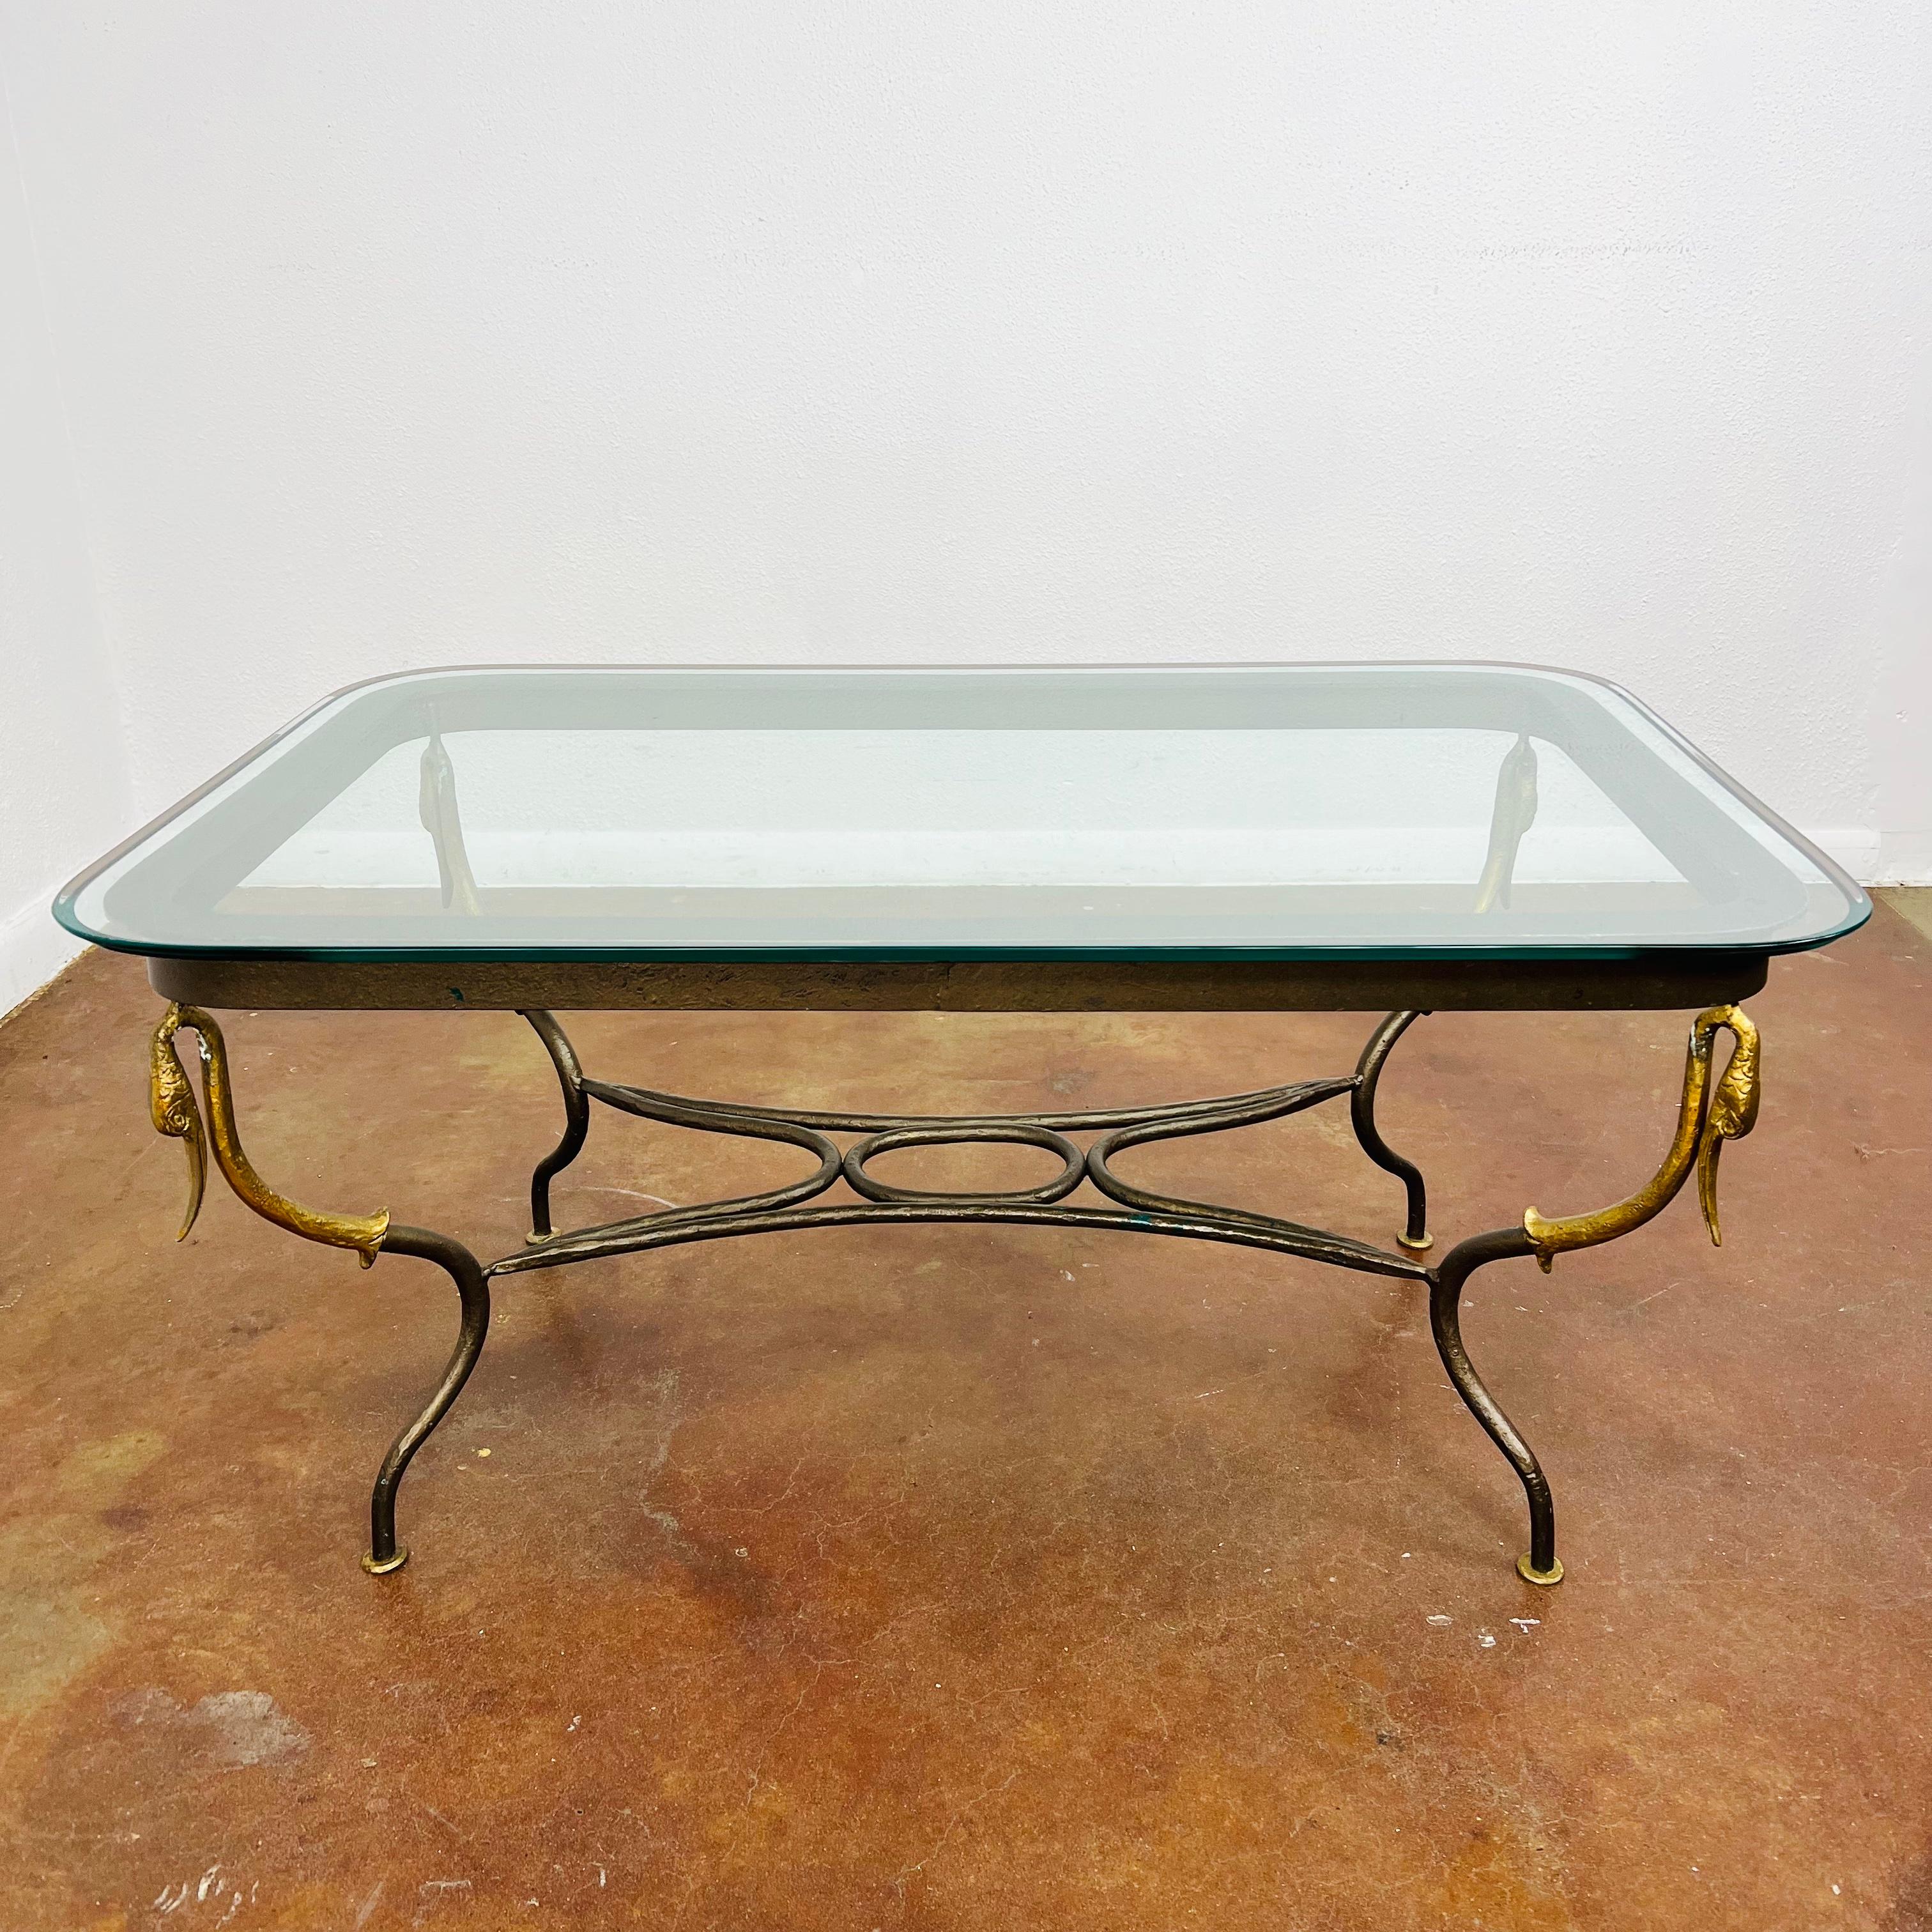 This rare 1920's French Empire swan coffee table is made of wrought iron with gilded accents. Very heavy and sturdy with beveled edge glass top. Good vintage condition with normal cosmetic wear due to age and use.